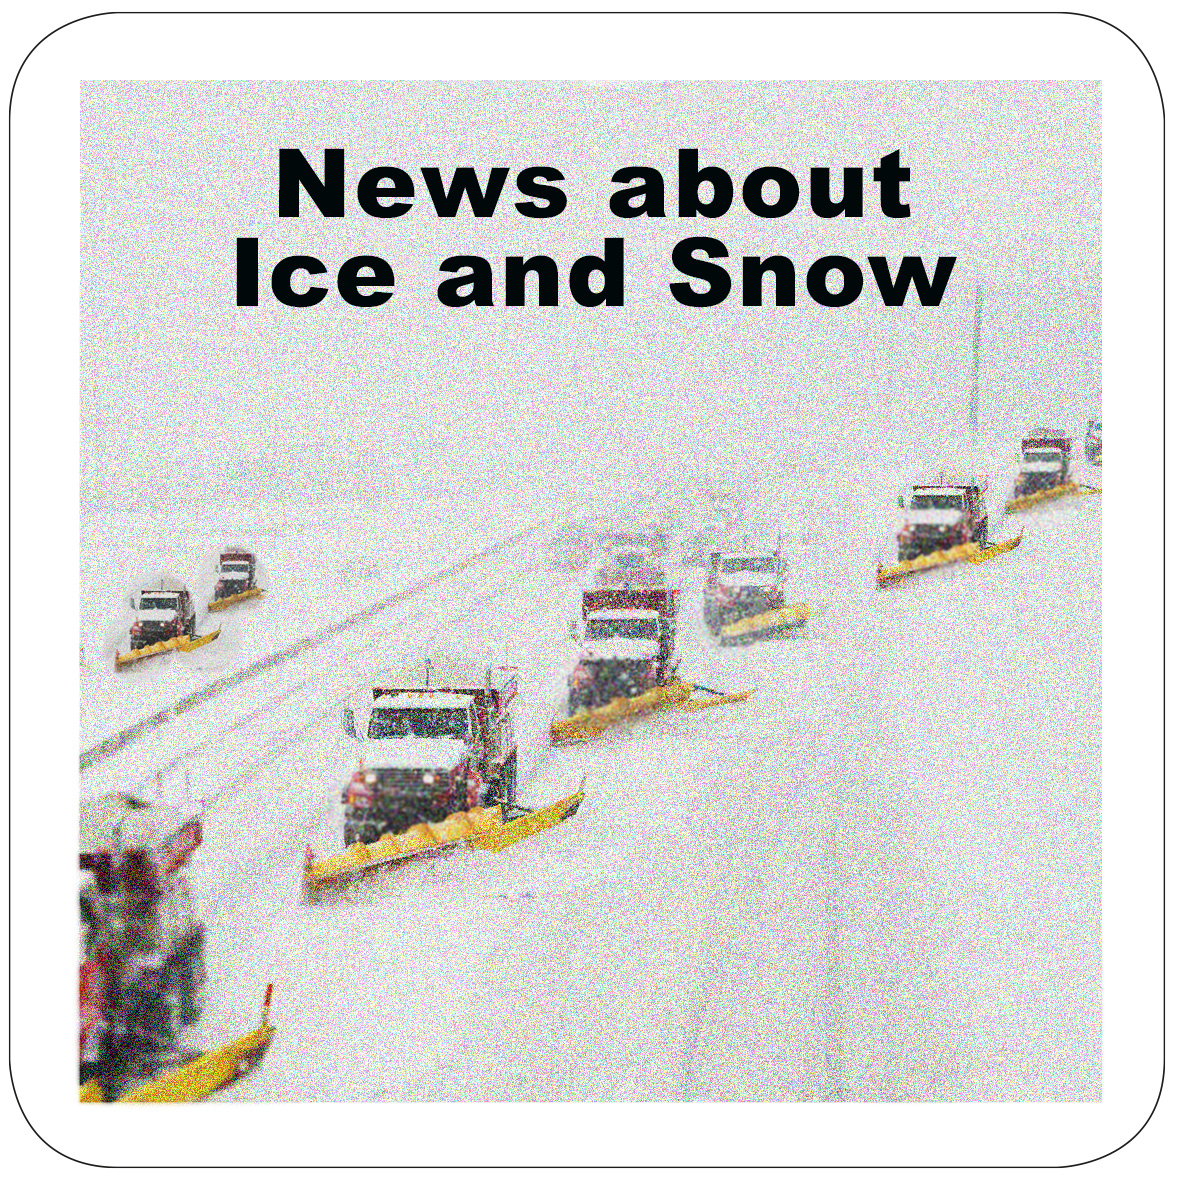 News about Ice and Snow